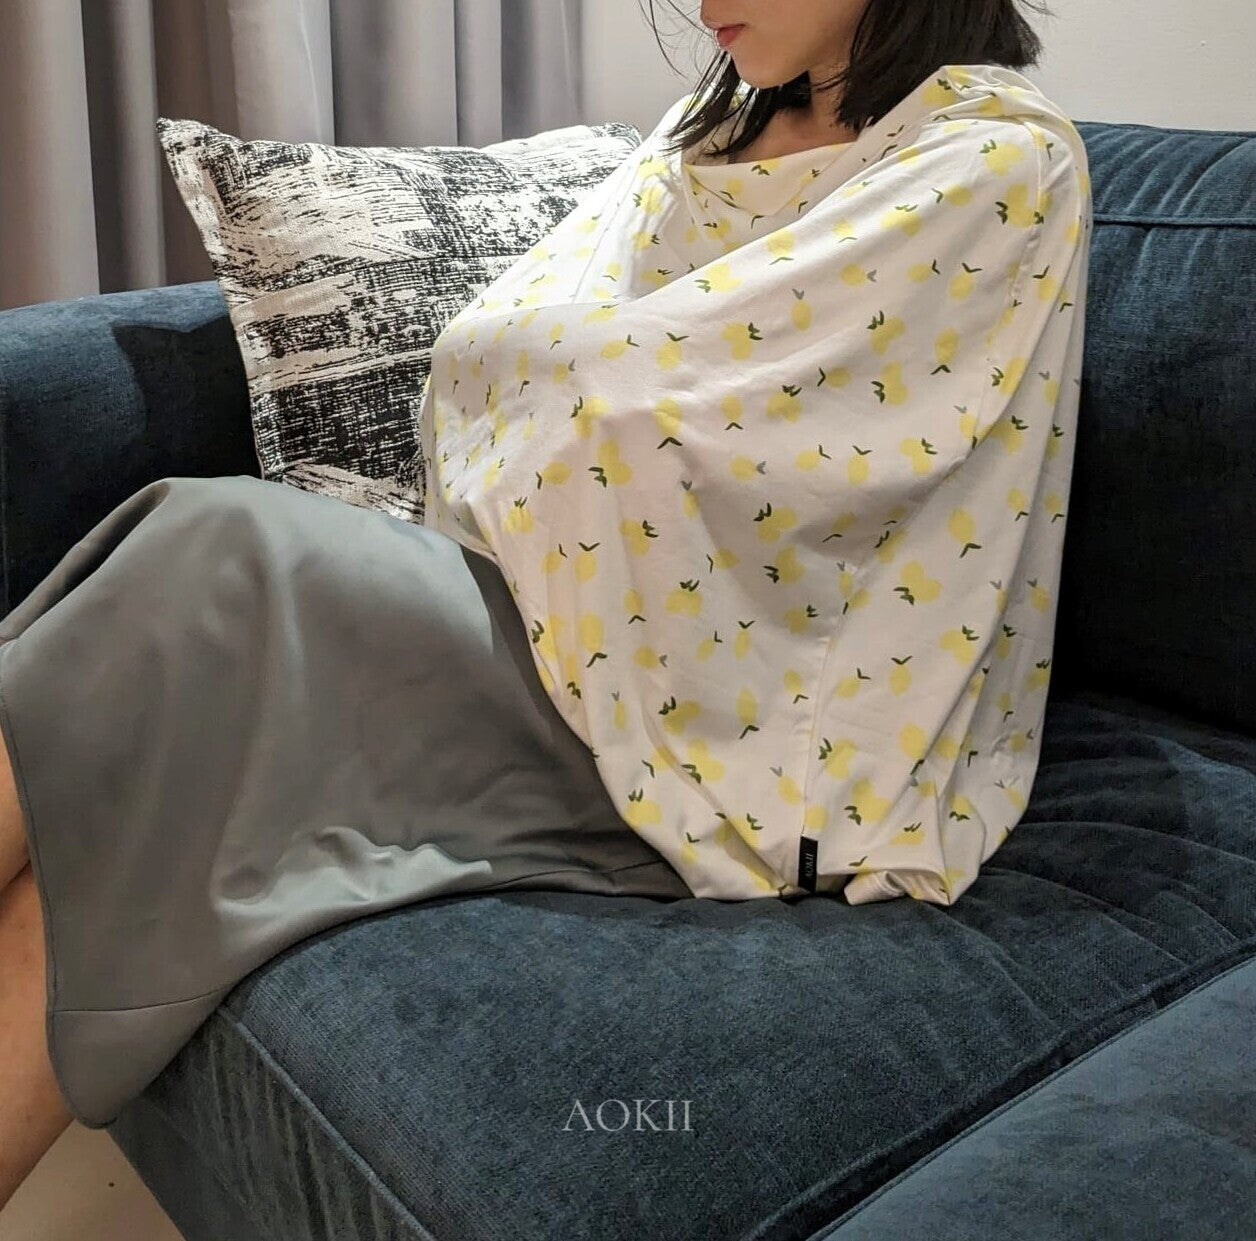 AOKII organic soft nursing cover for breastfeeding and baby shower gifts